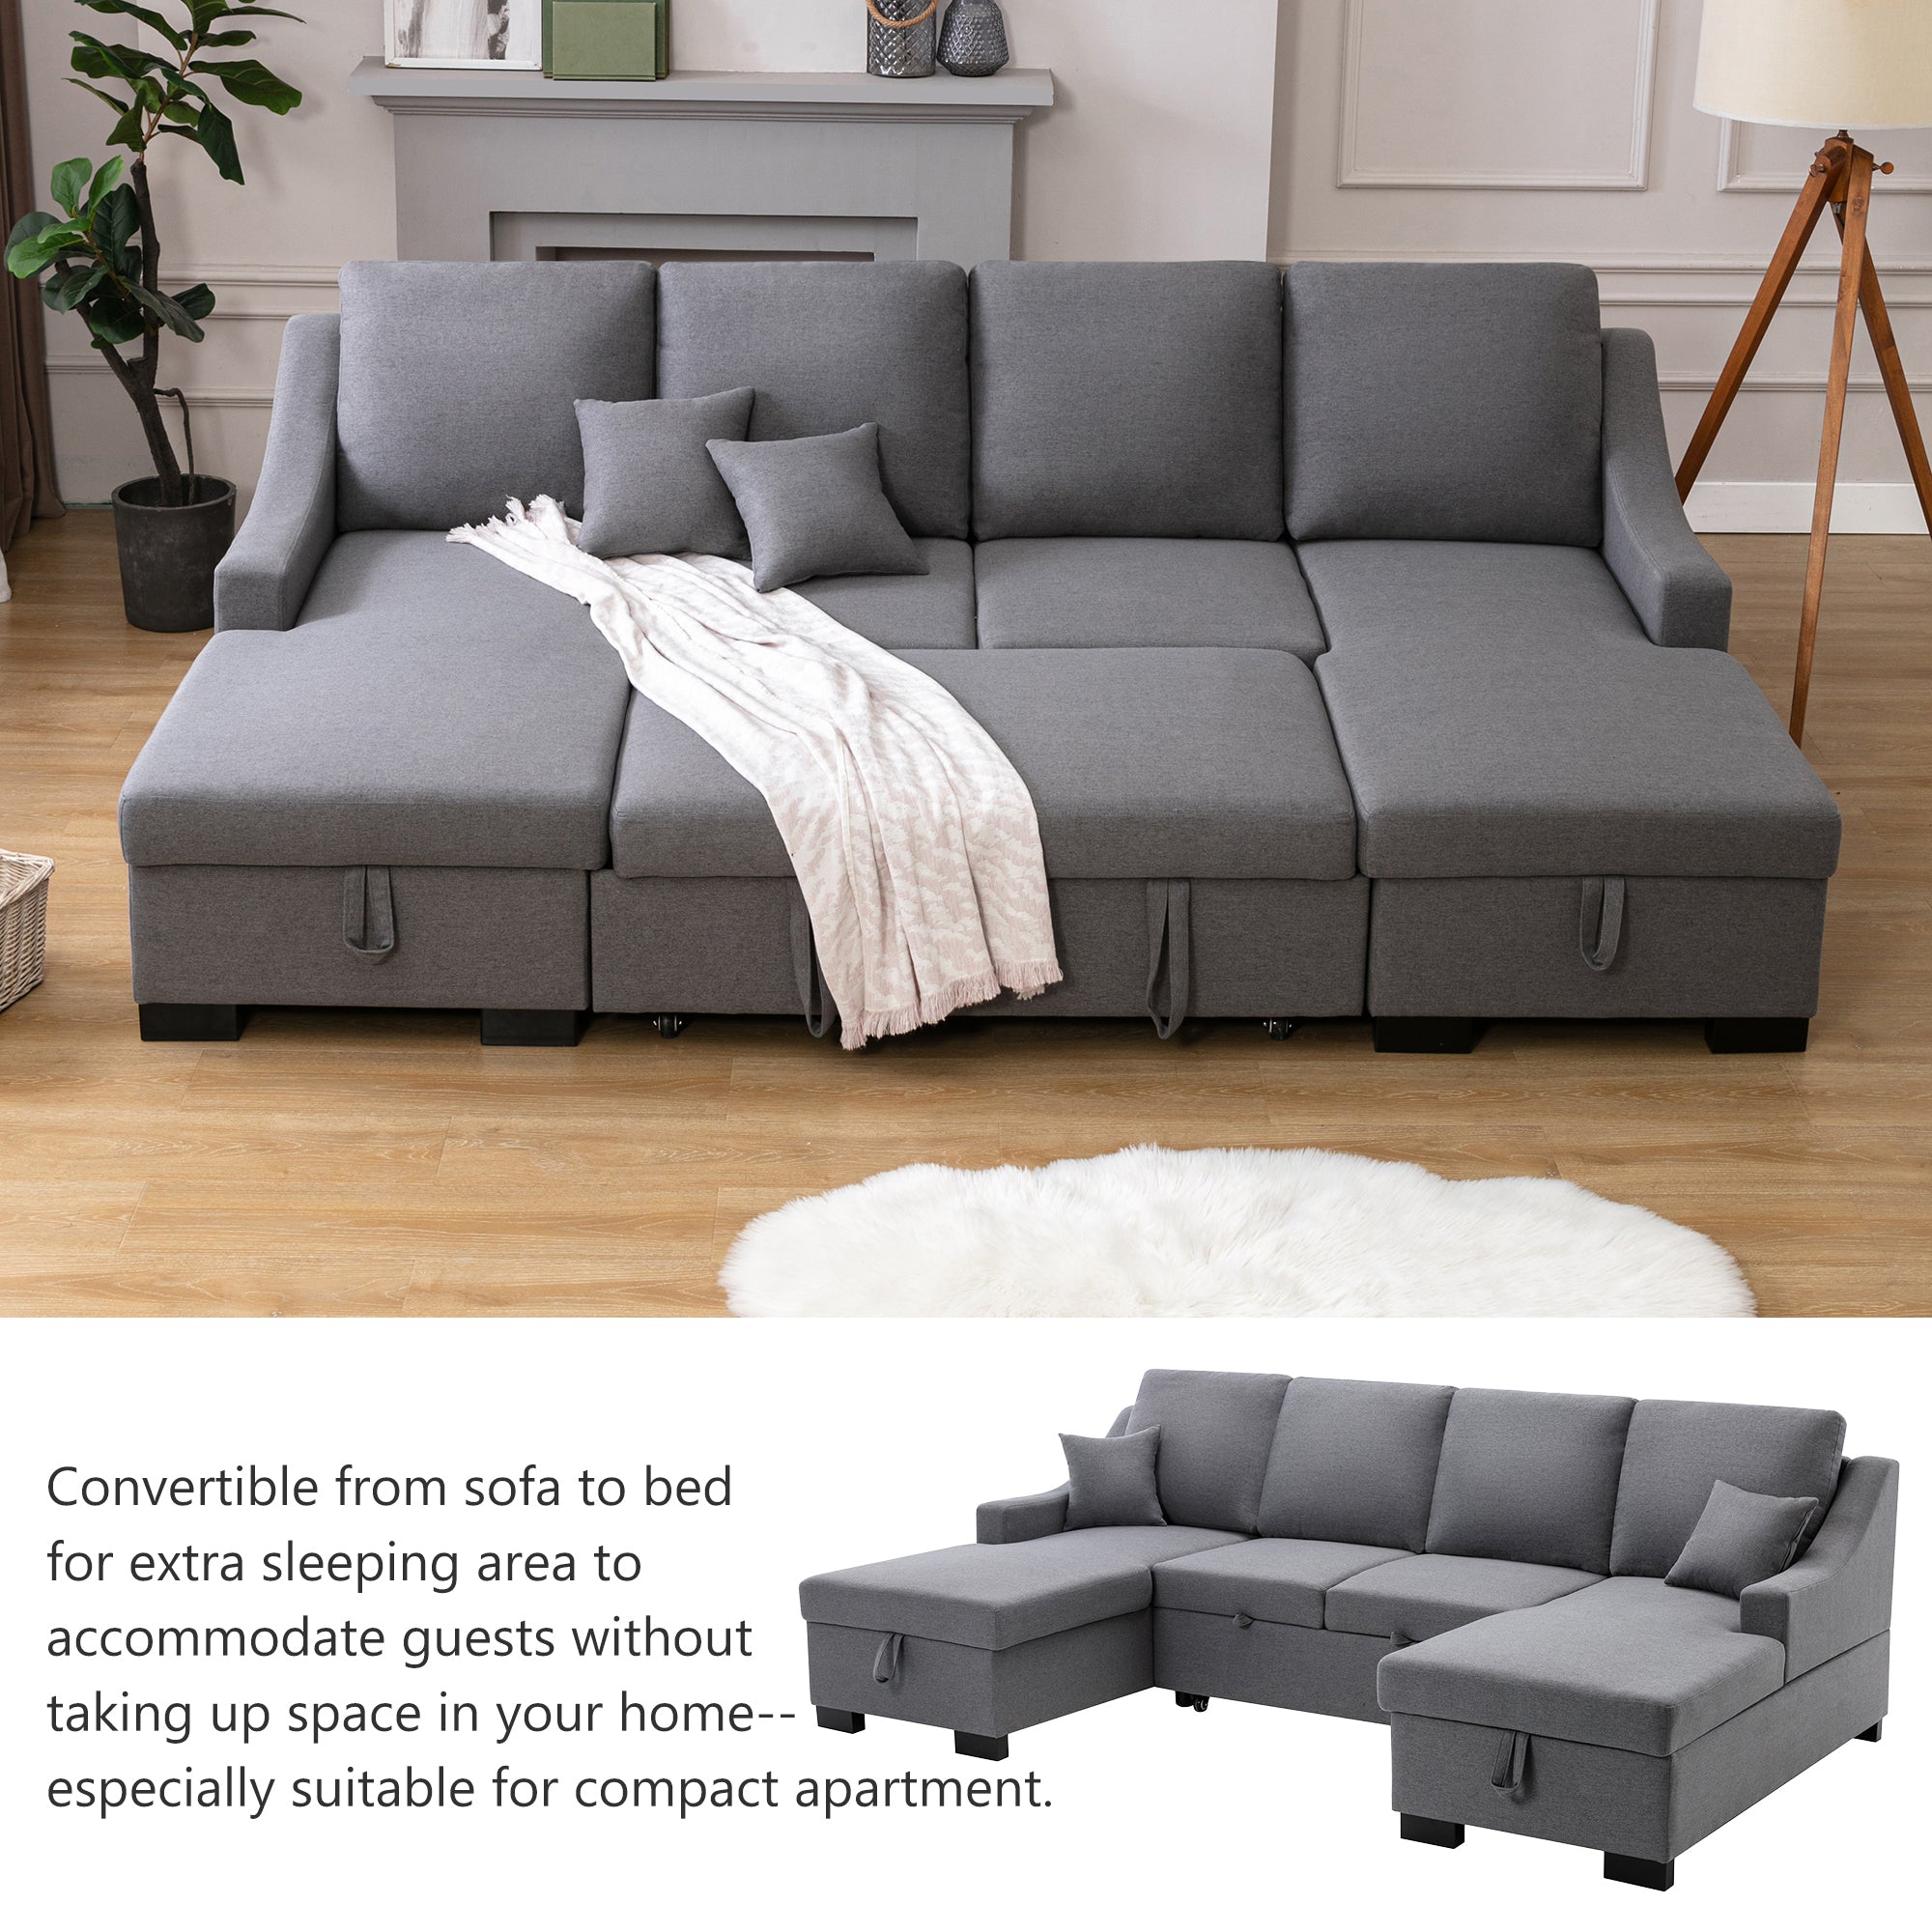 U-Style Upholstery Sleeper Sectional Sofa with Double Storage Spaces, 2 Tossing Cushions, Grey | Comfortable and Functional Addition to Your Living Space-Sleeper Sectionals-American Furniture Outlet